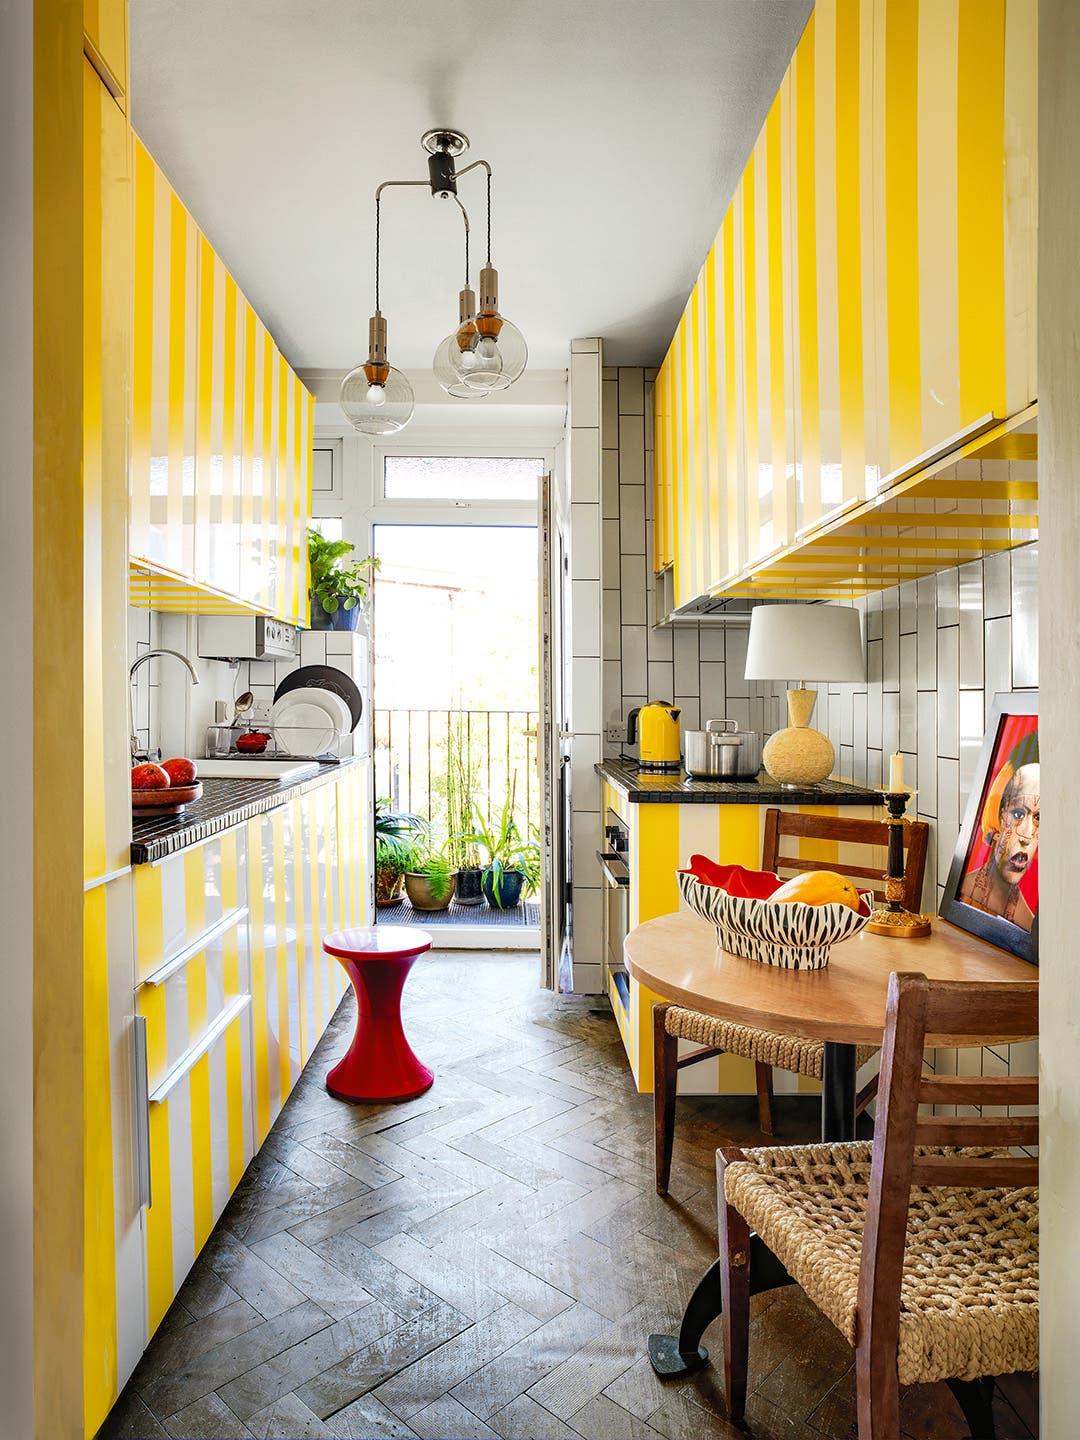 Tape—Not Paint—Transformed This London Kitchen Into an Italy-Inspired Paradise